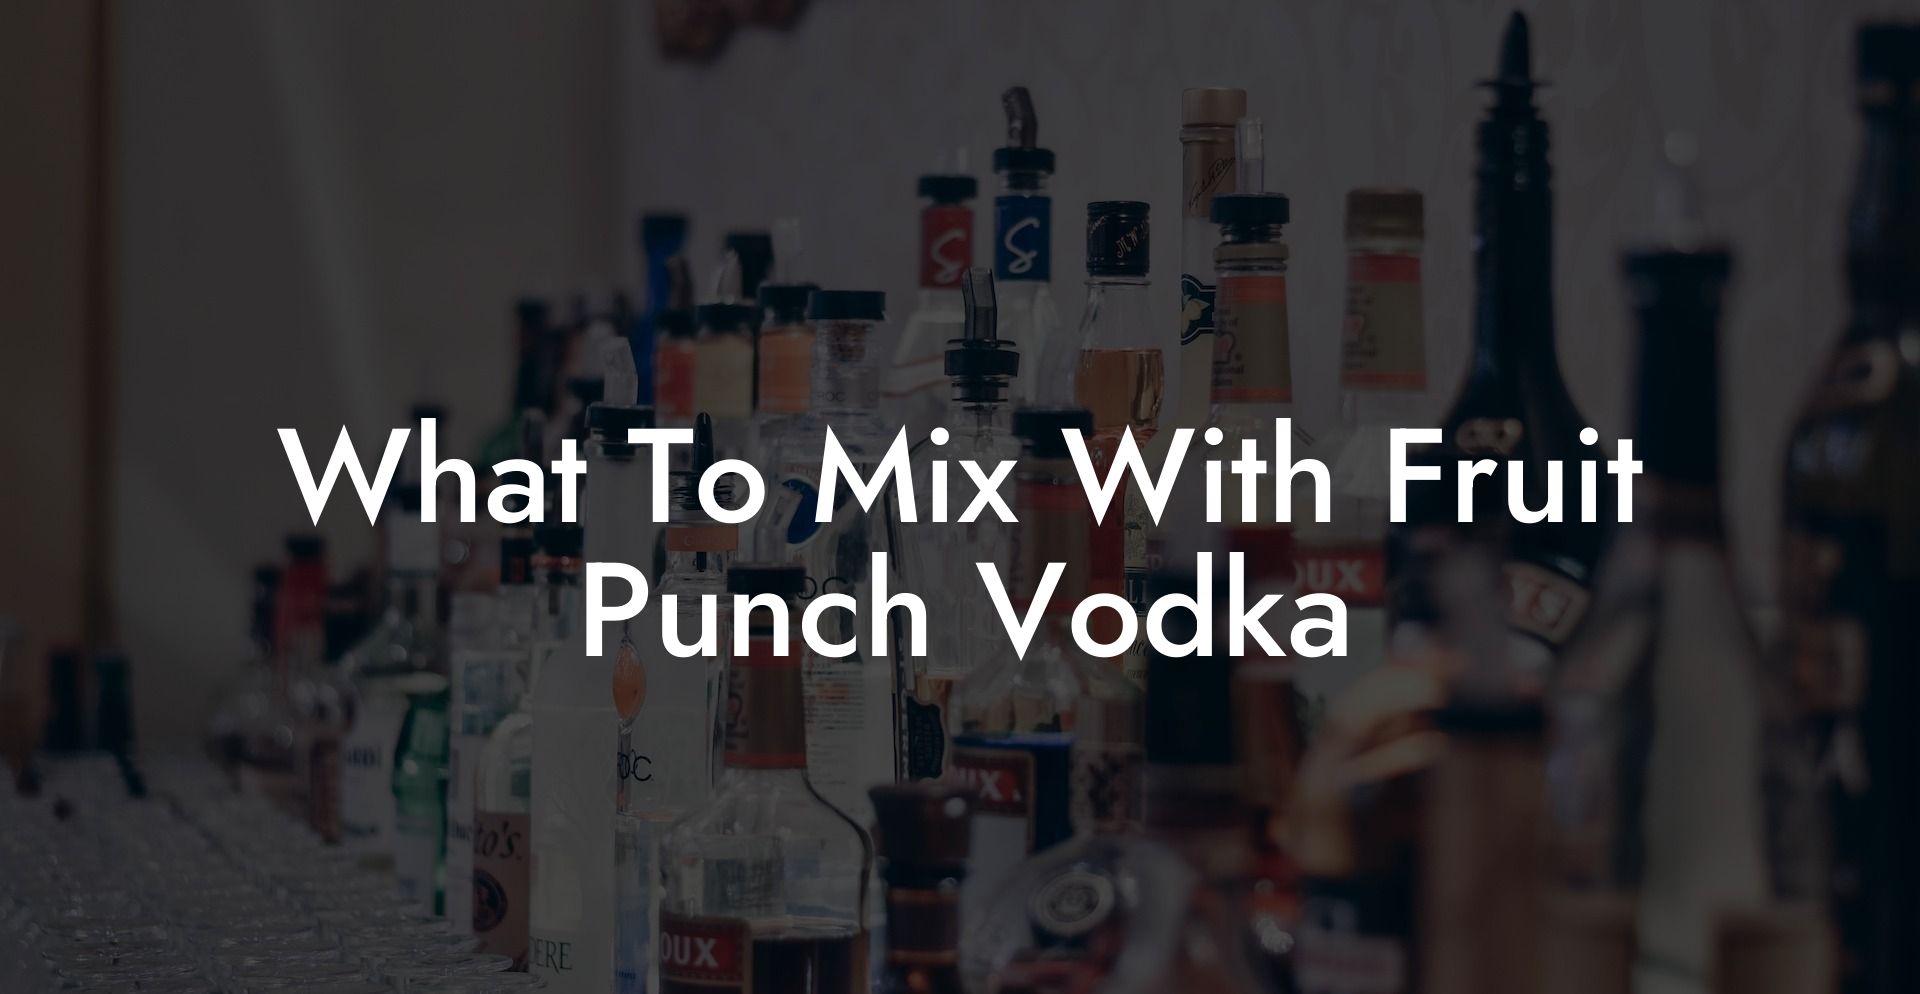 What To Mix With Fruit Punch Vodka